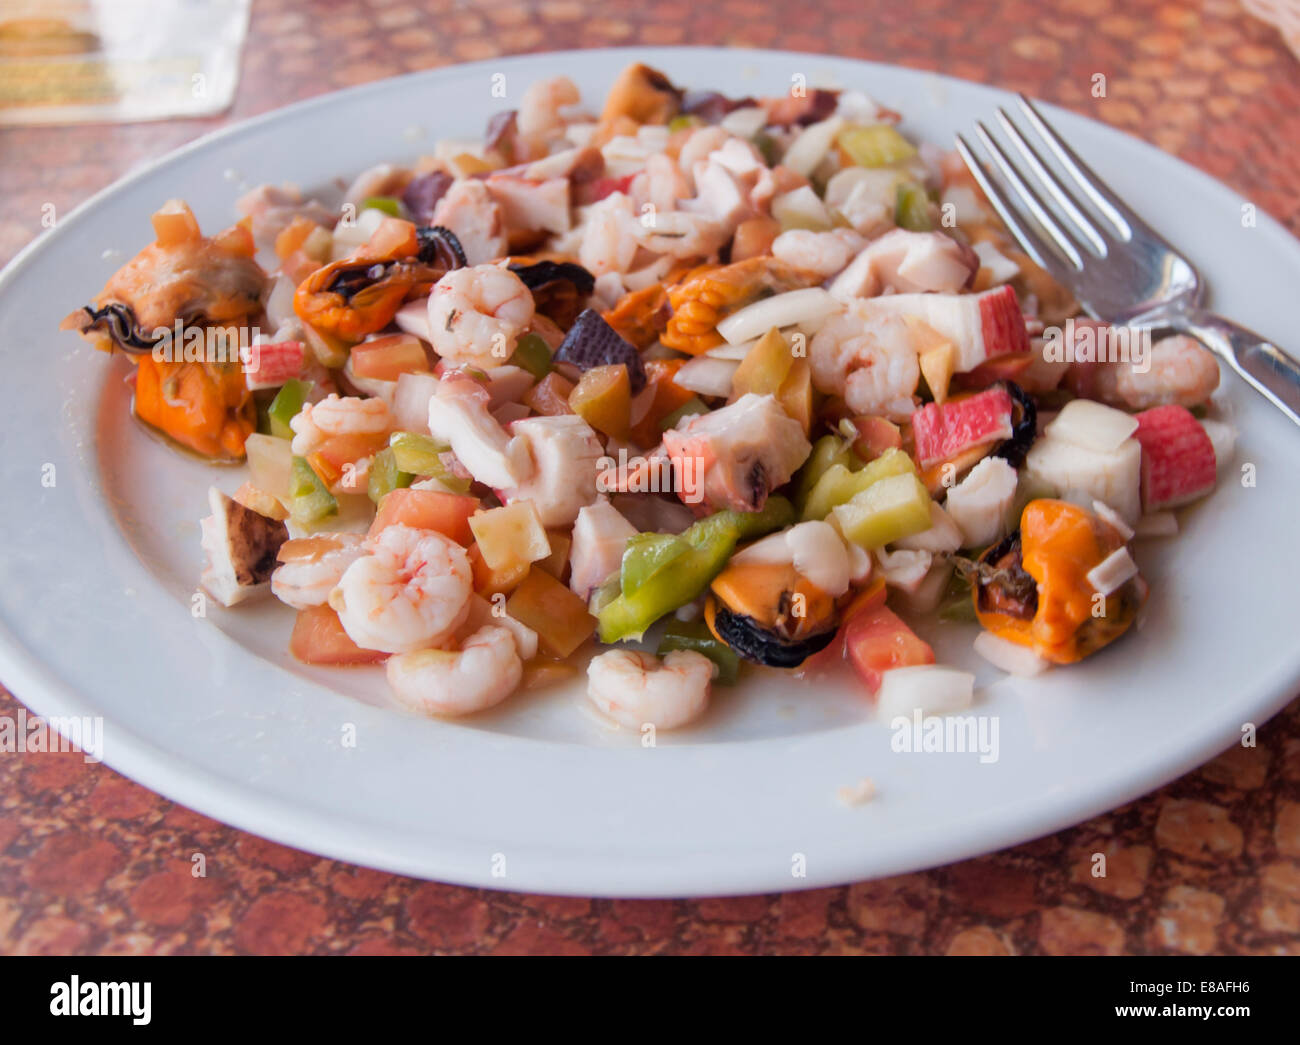 Plate with seafood such as pulpo, gambas, shrimp, mussels and vegetables. Spain. Stock Photo